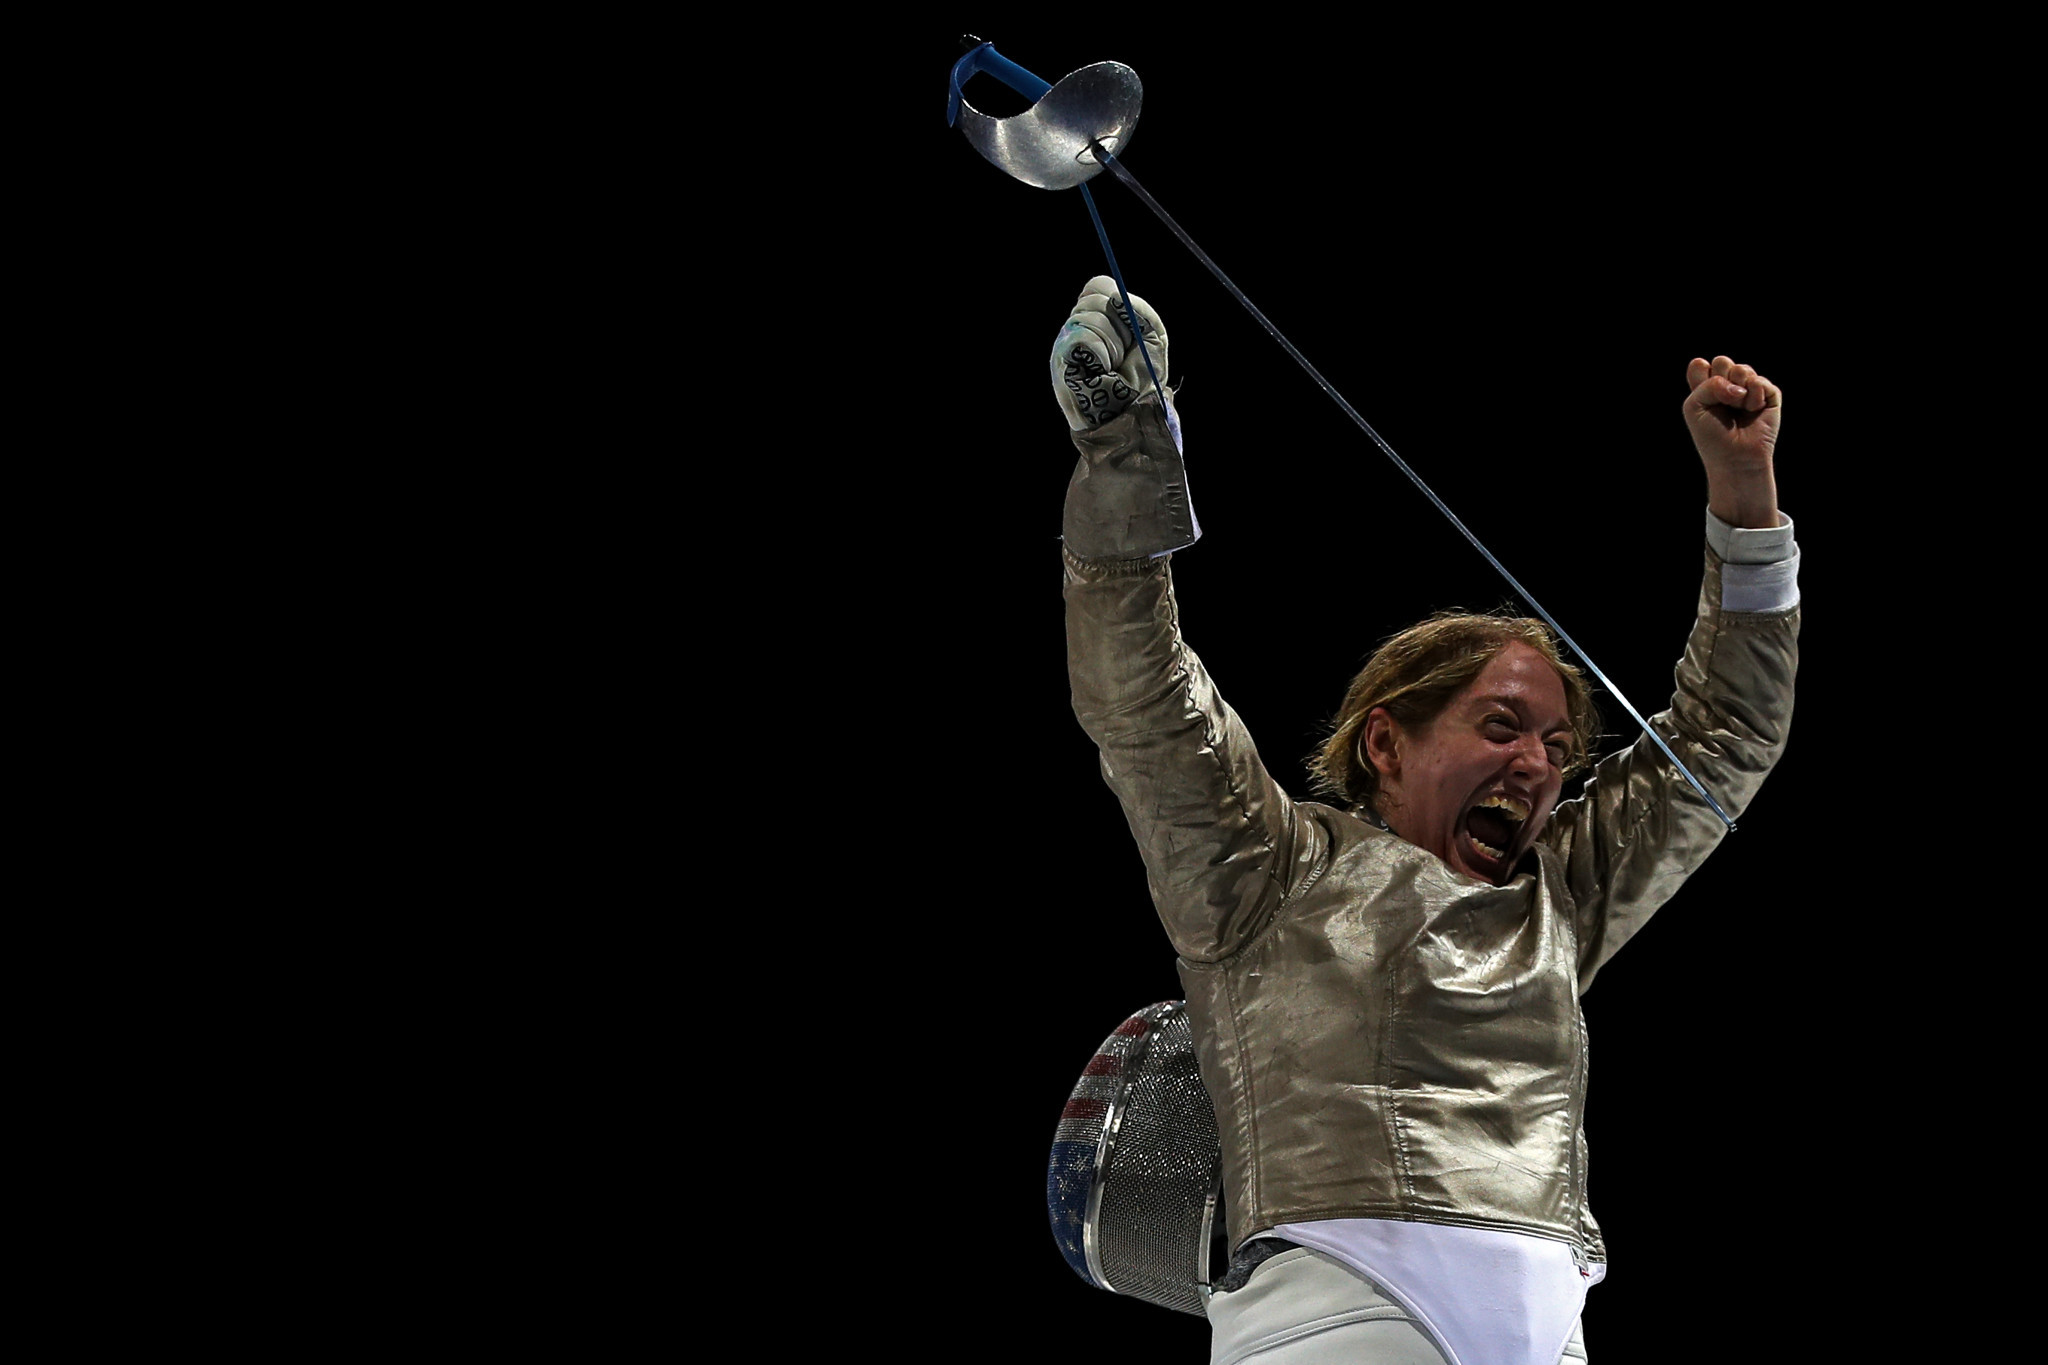 Anne-Elizabeth Stone of the US topped the podium in the women's fencing sabre event ©Lima 2019